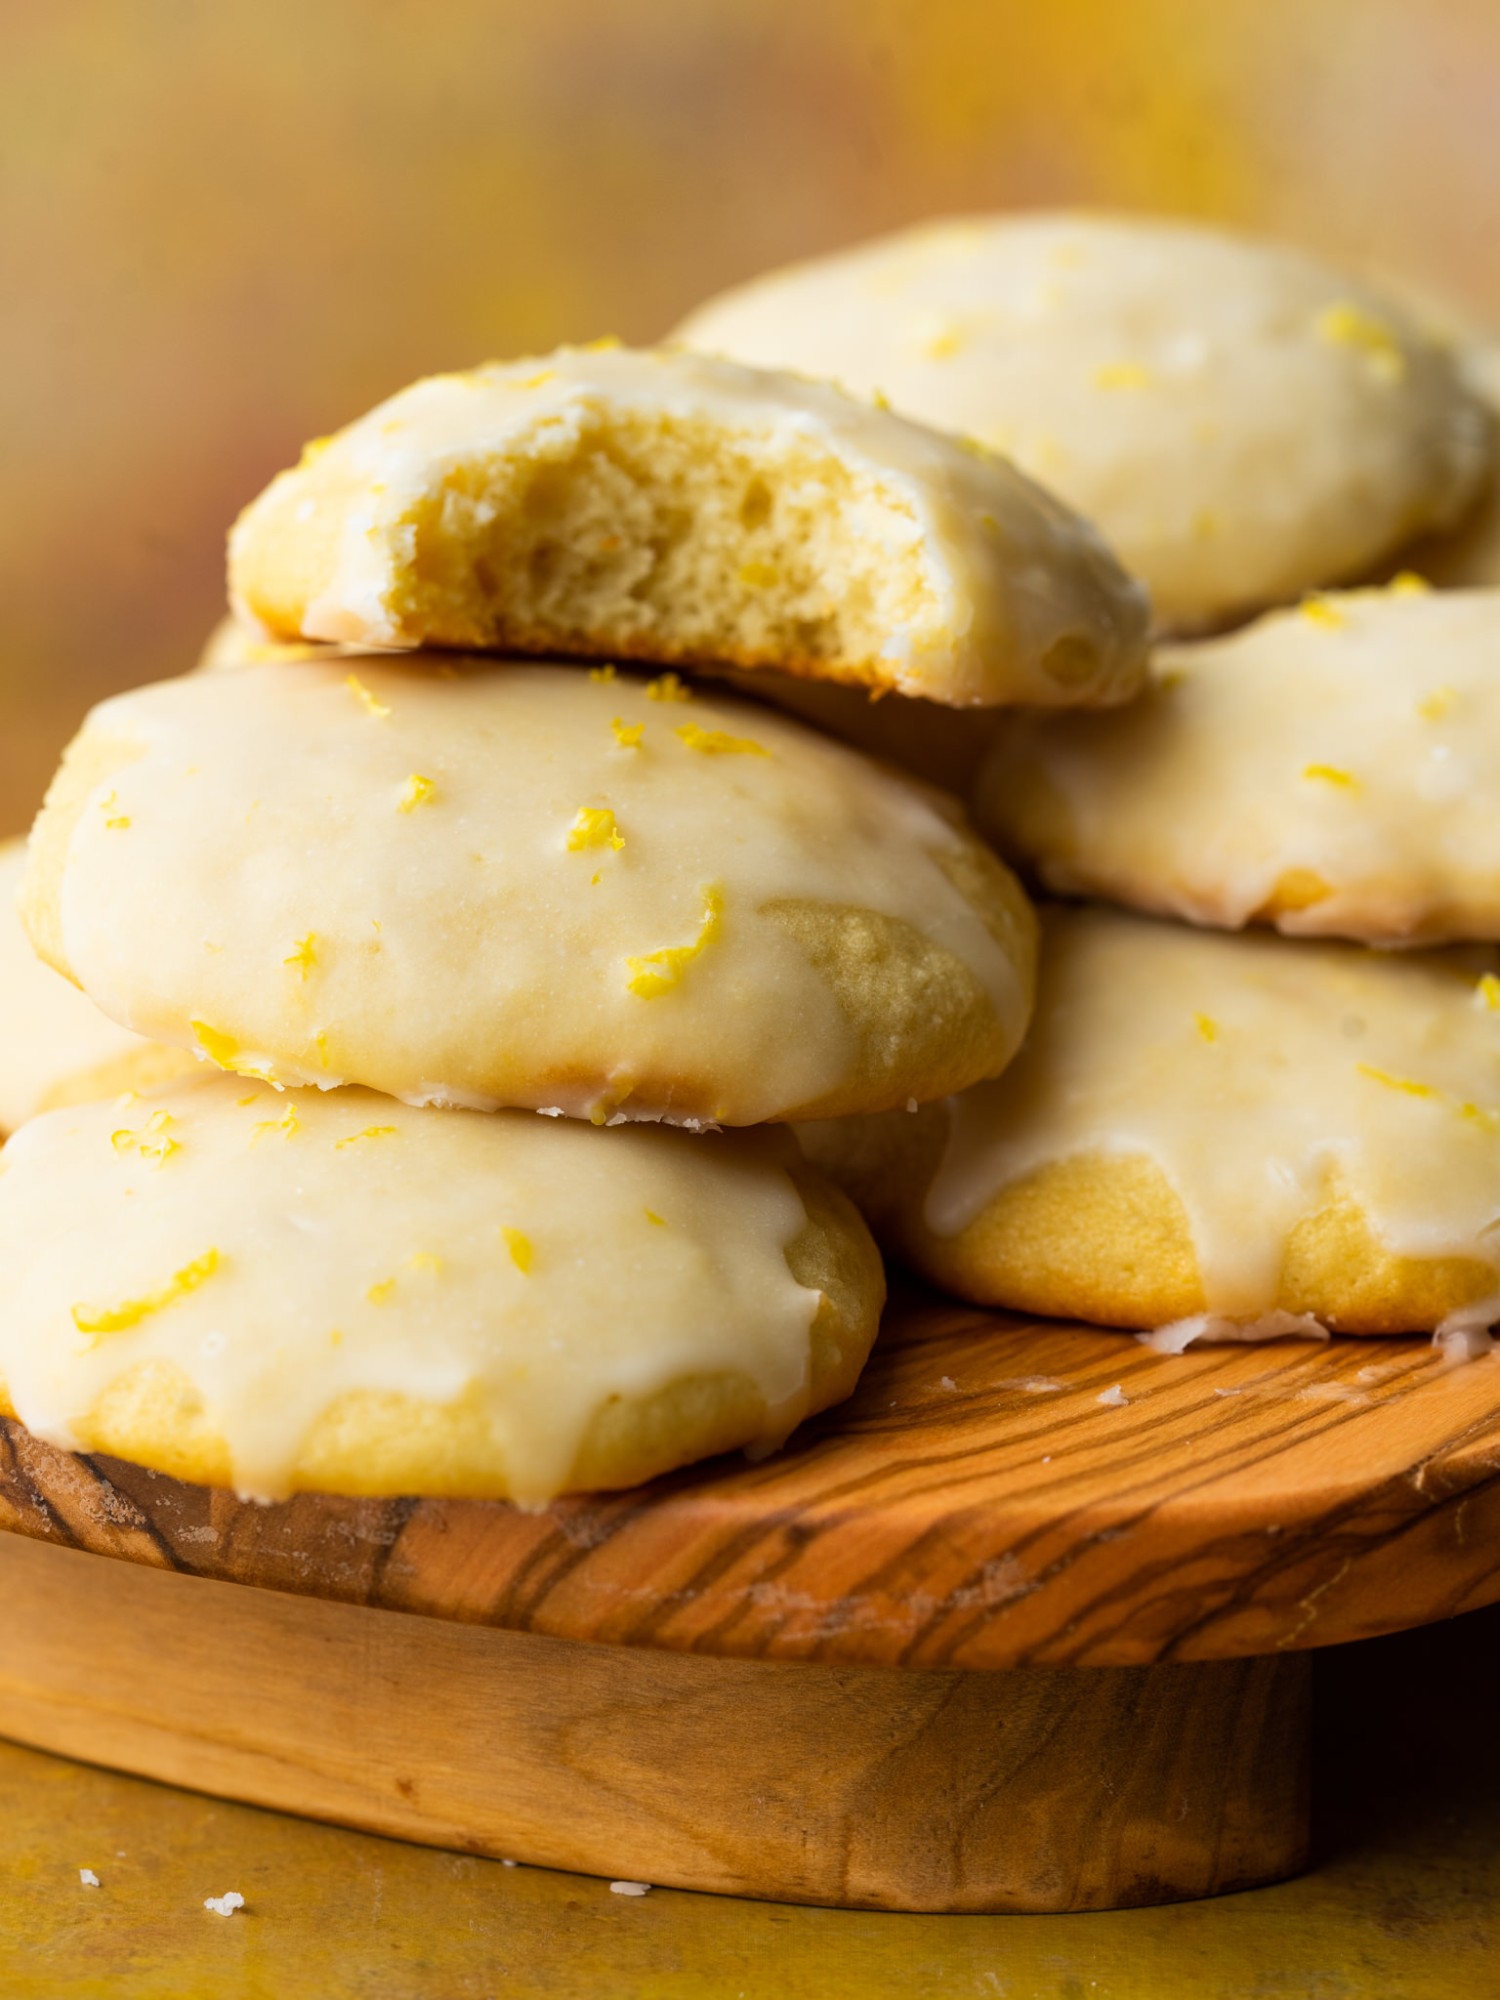 Lemon ricotta cookie recipe with lemon glaze and a bite out of the cookies